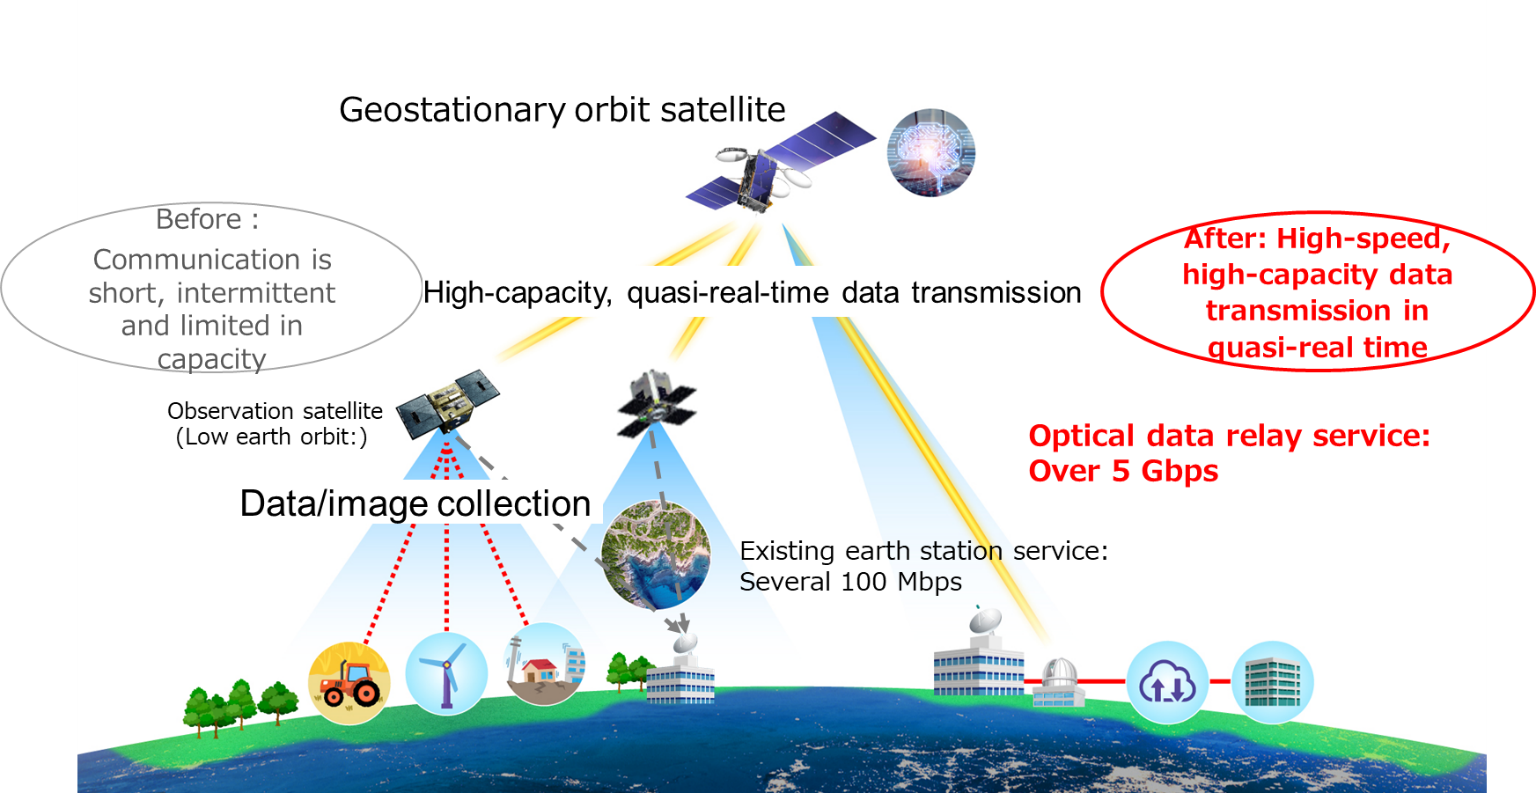 Figure 1: Overview of optical data relay service